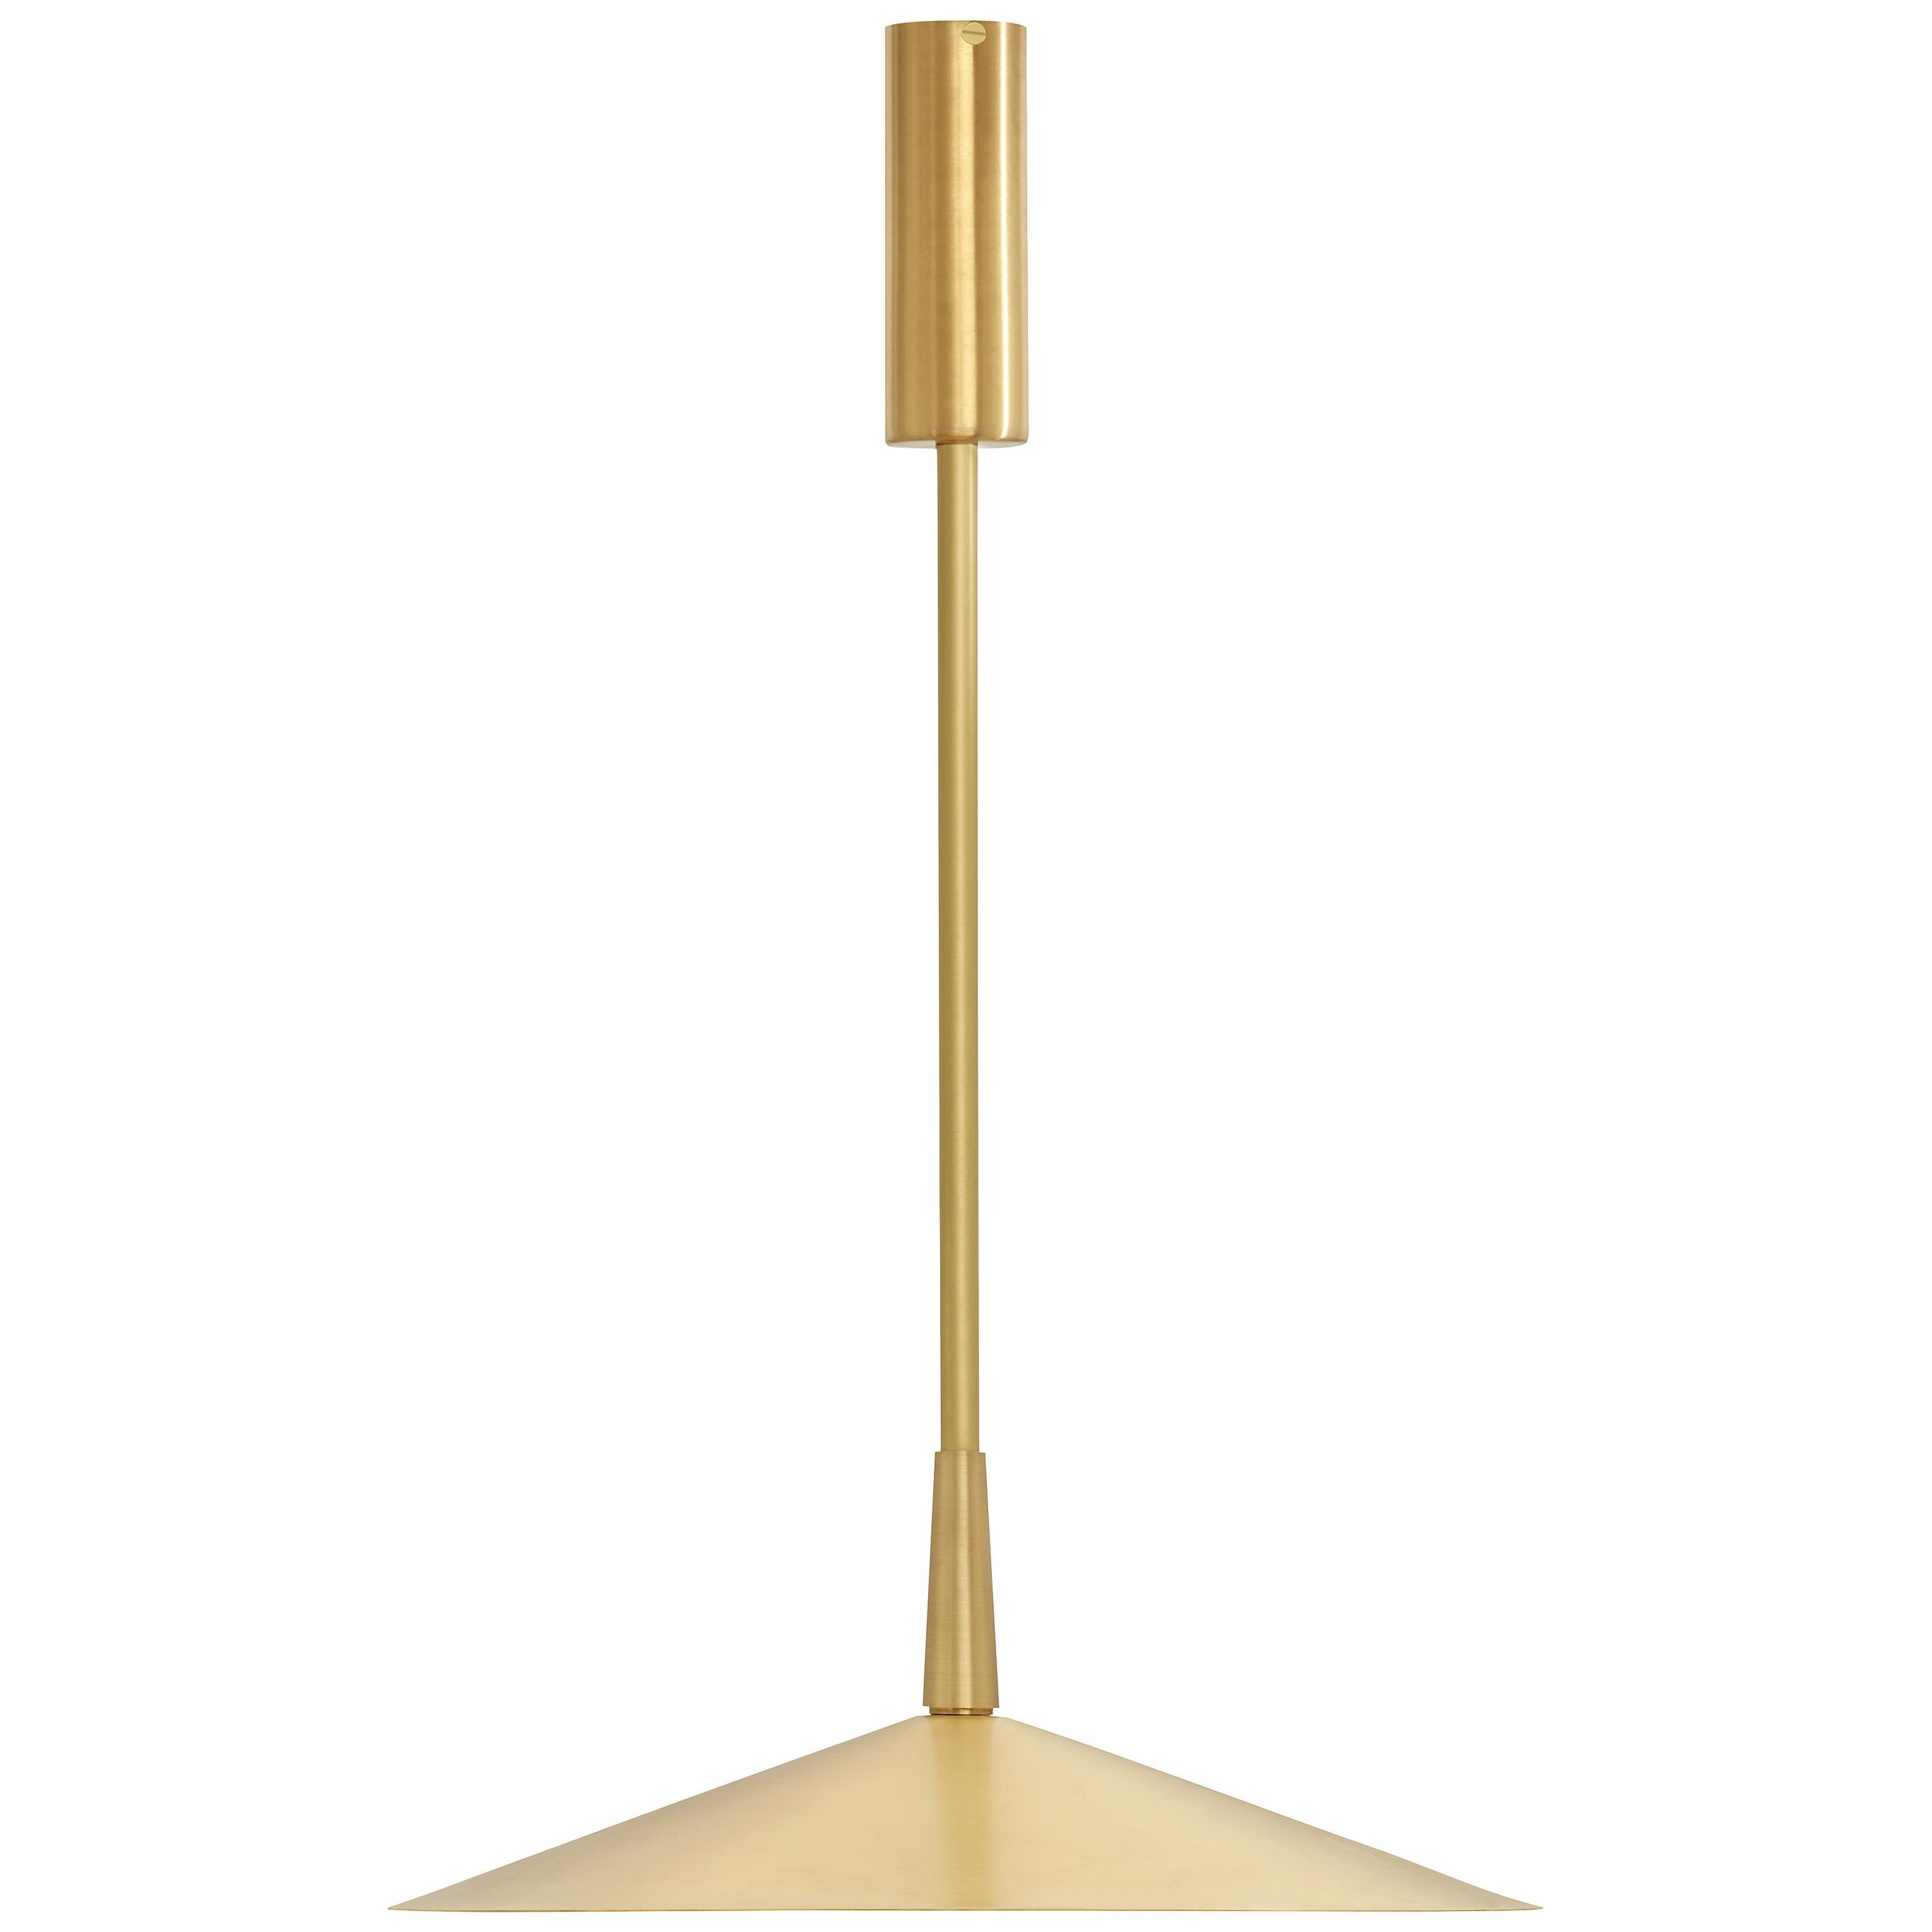 Tinto small pendant by CTO Lighting
Materials: satin brass 
Also available in dark bronze shade and finial with satin brass drop rod and ceiling rose
satin brass shade and finial with dark bronze drop rod and ceiling rose
all dark bronze
all satin